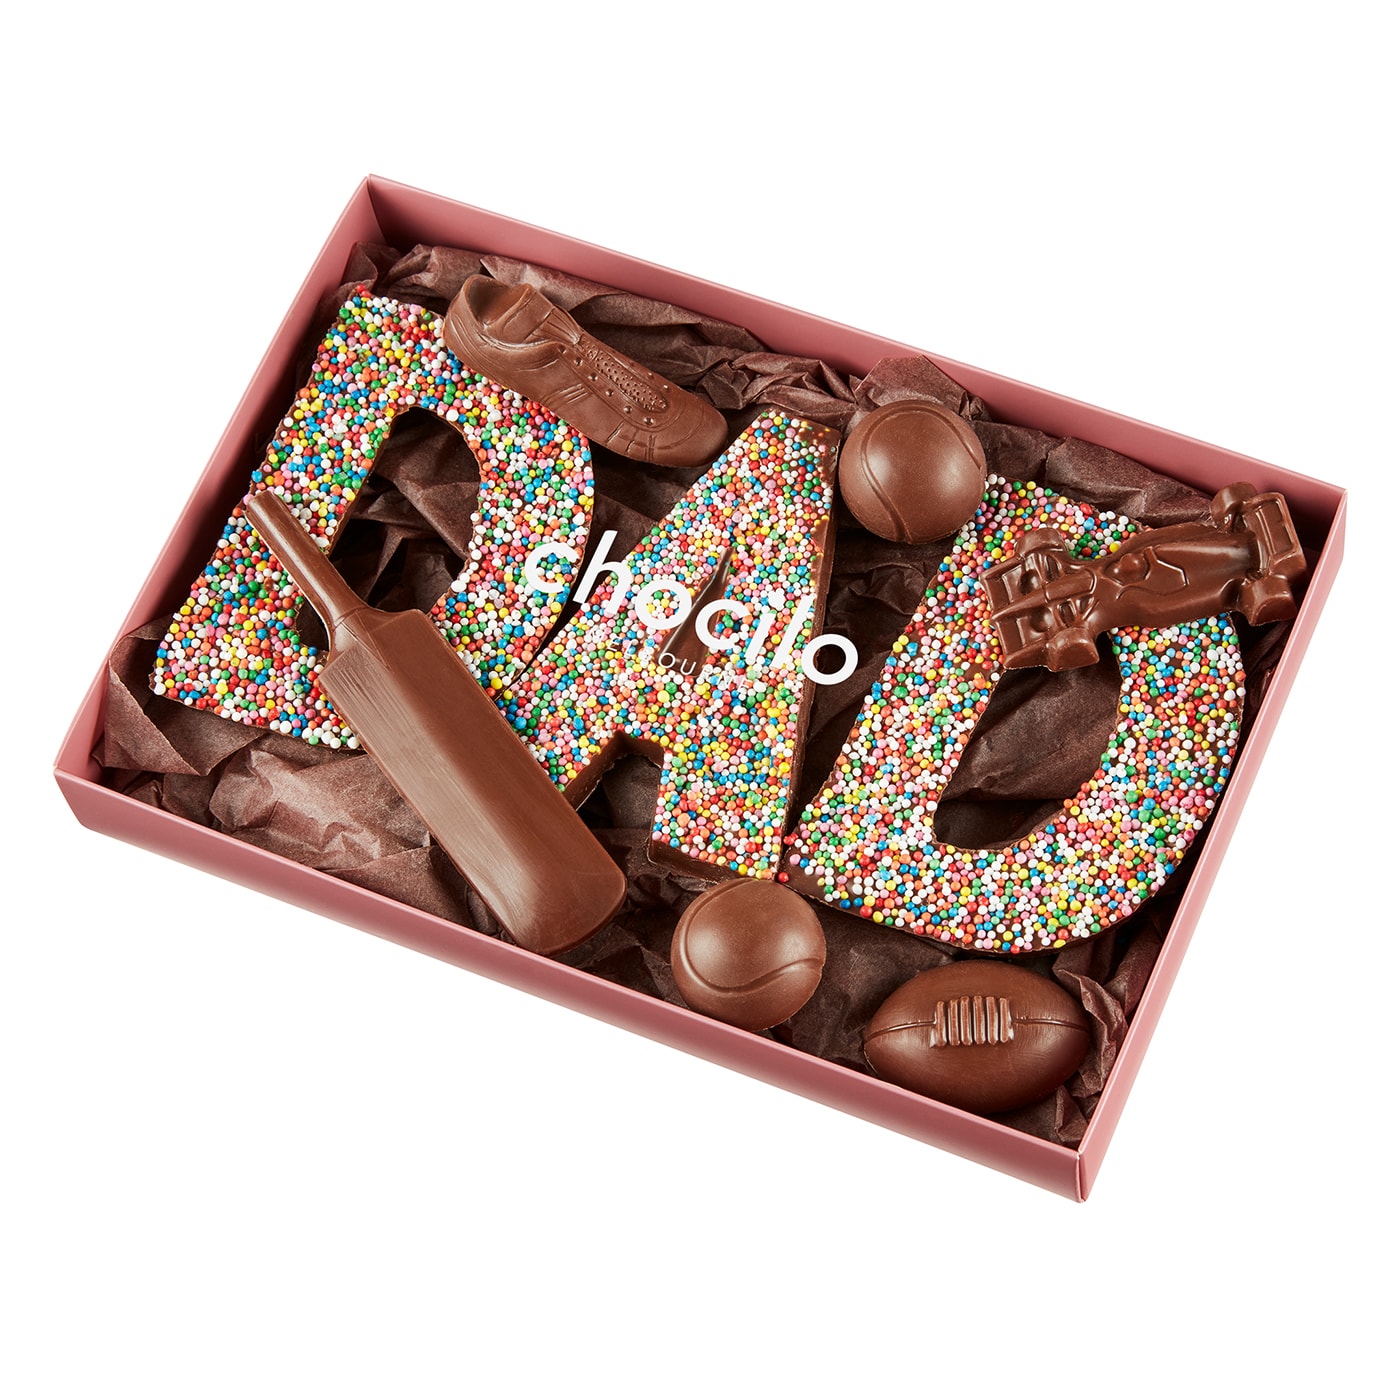 Sporting Speckle Dad in Milk Chocolate Gift Box - 190g